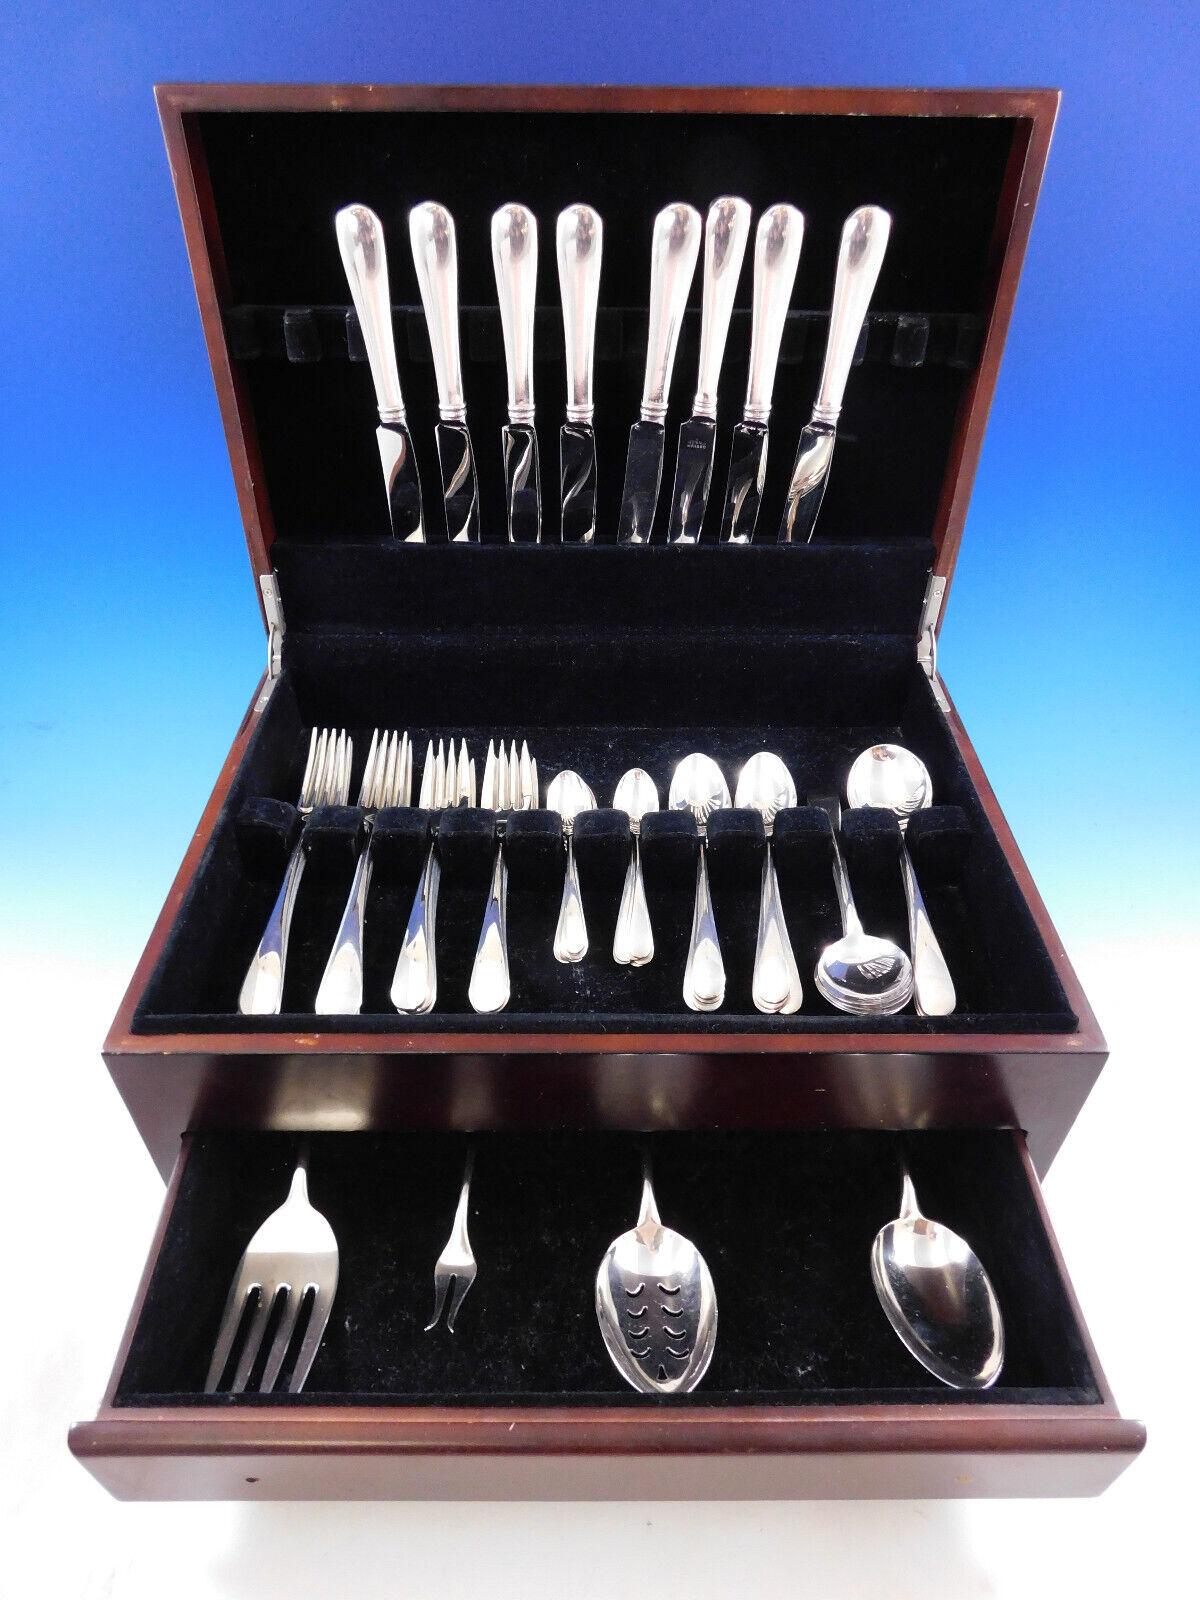 French Colonial by Blackinton sterling silver Flatware set, 52 pieces. This set includes:

8 Knives, 8 3/4